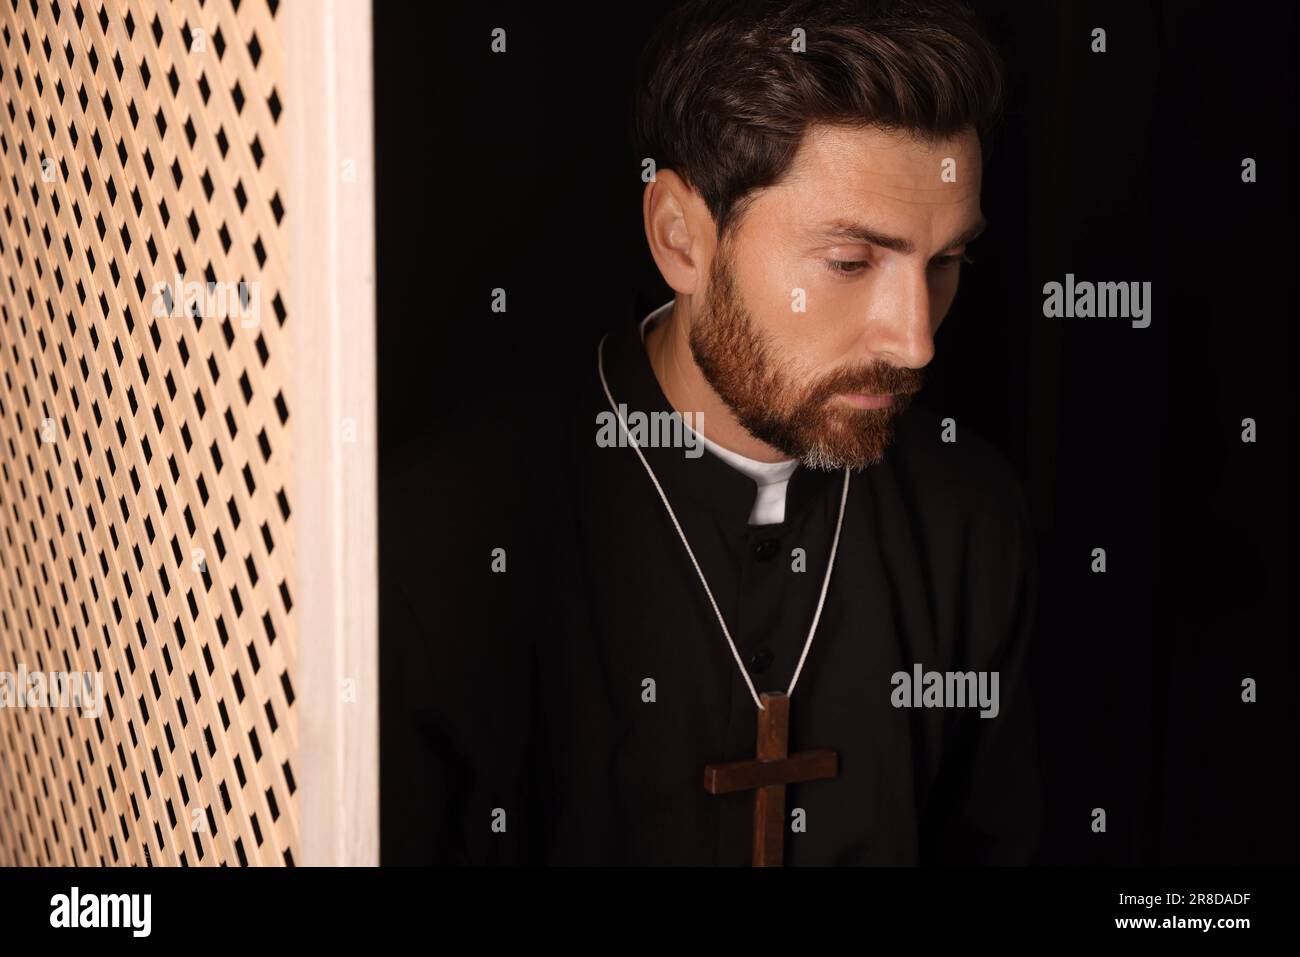 Catholic priest wearing cassock in confessional booth Stock Photo - Alamy